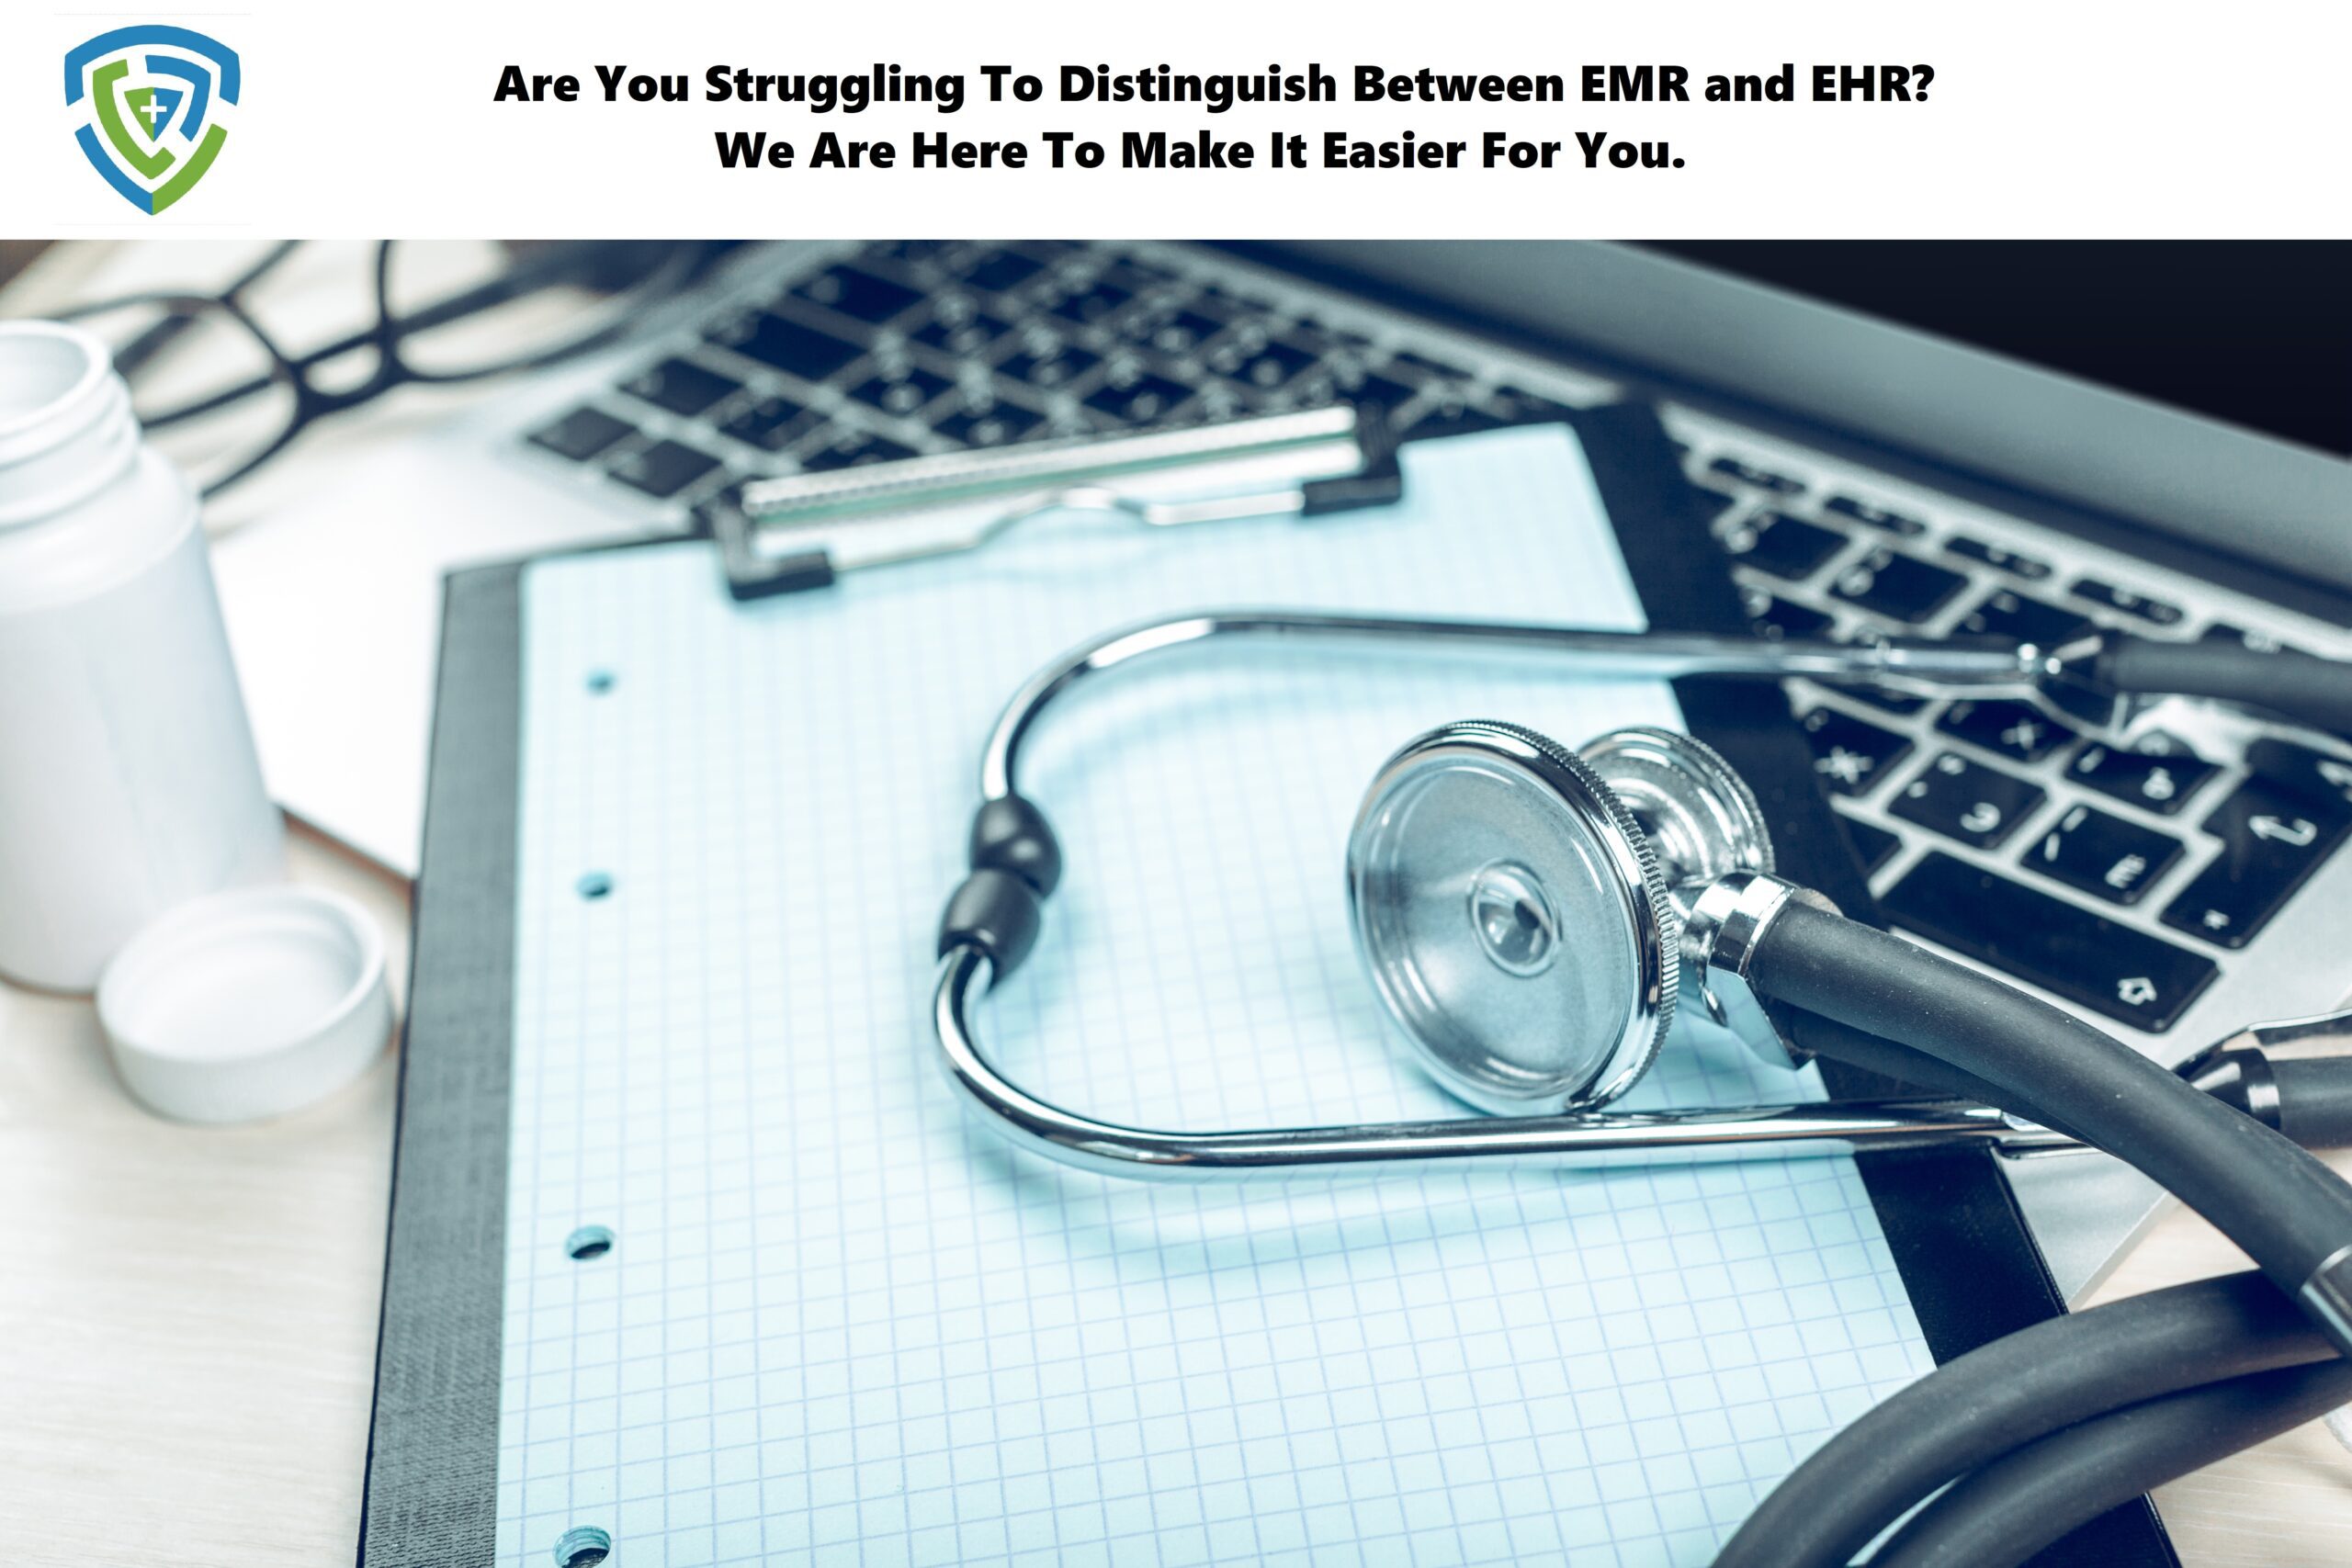 Are You Struggling To Distinguish Between EMR and EHR? We Are Here To Make It Easier For You.